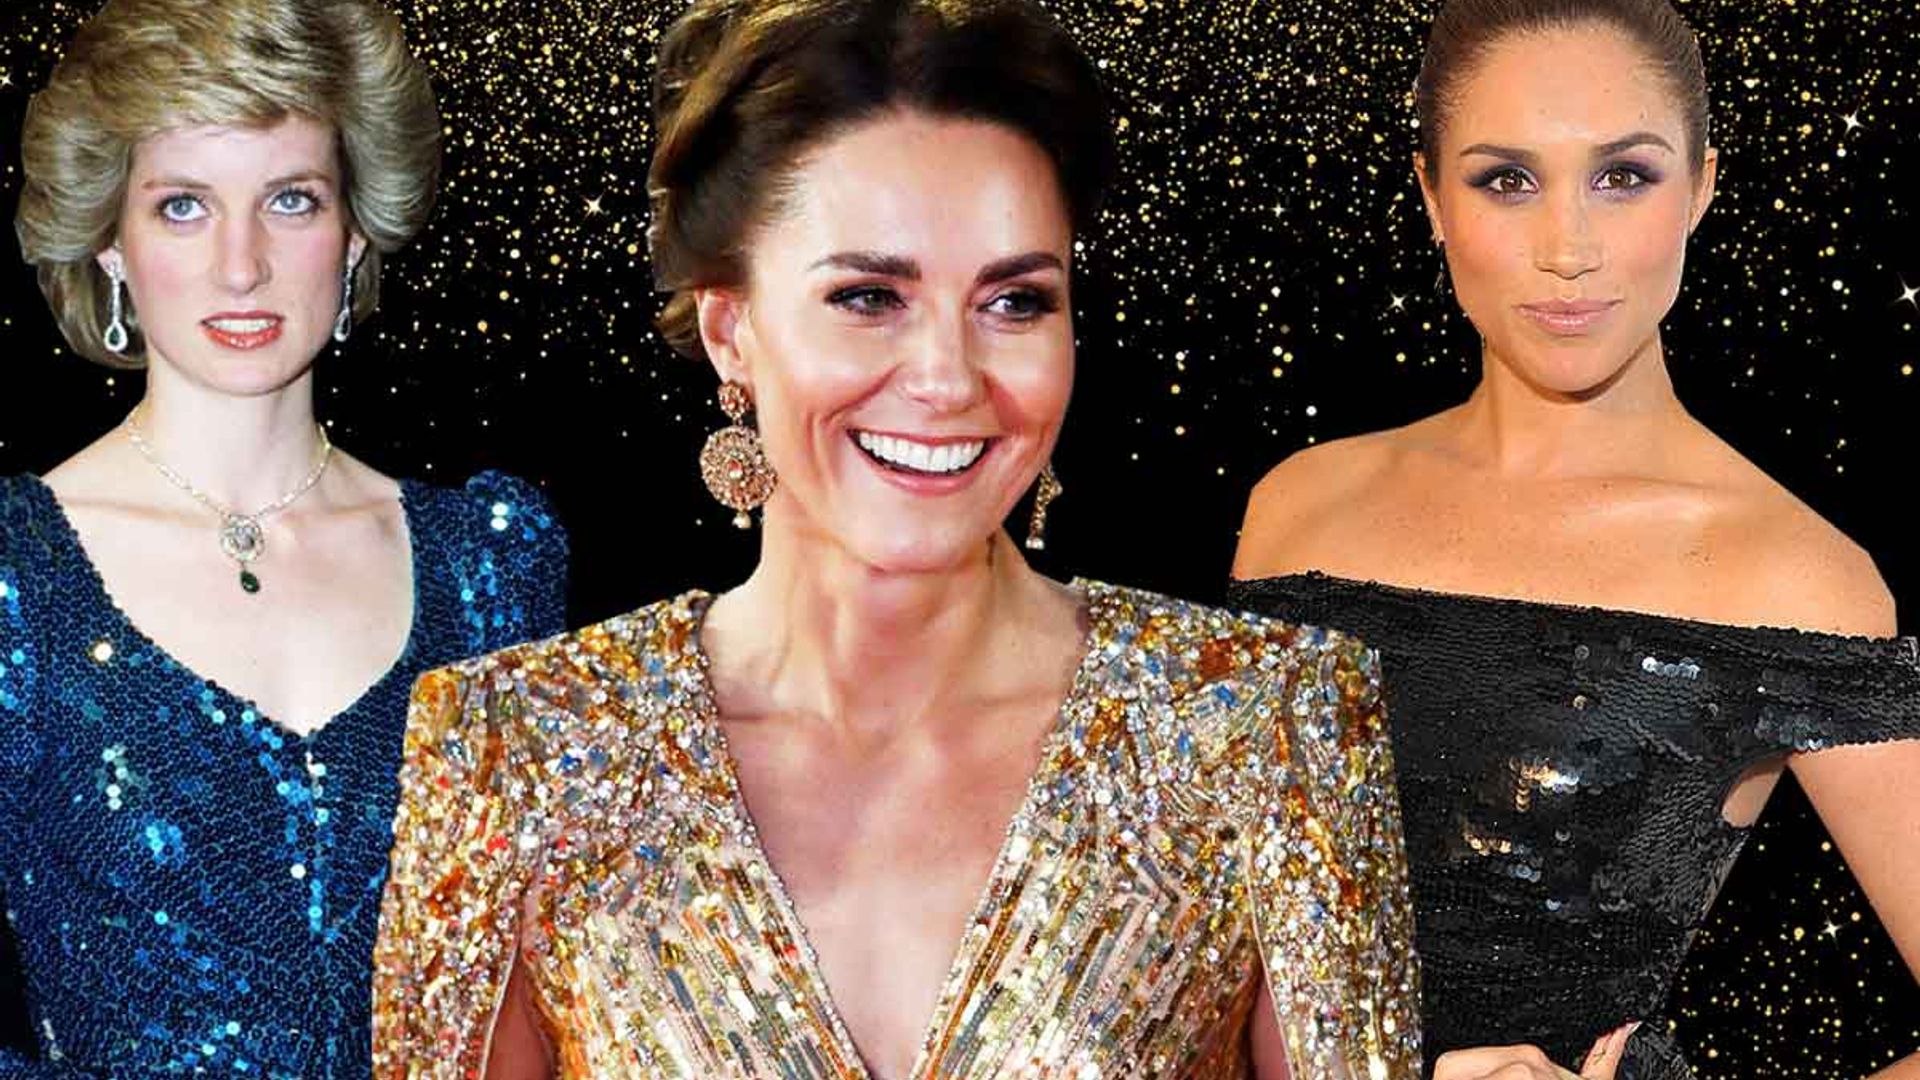 Royal ladies rocking festive sequins! Kate Middleton, Meghan Markle and more in their glittering outfits